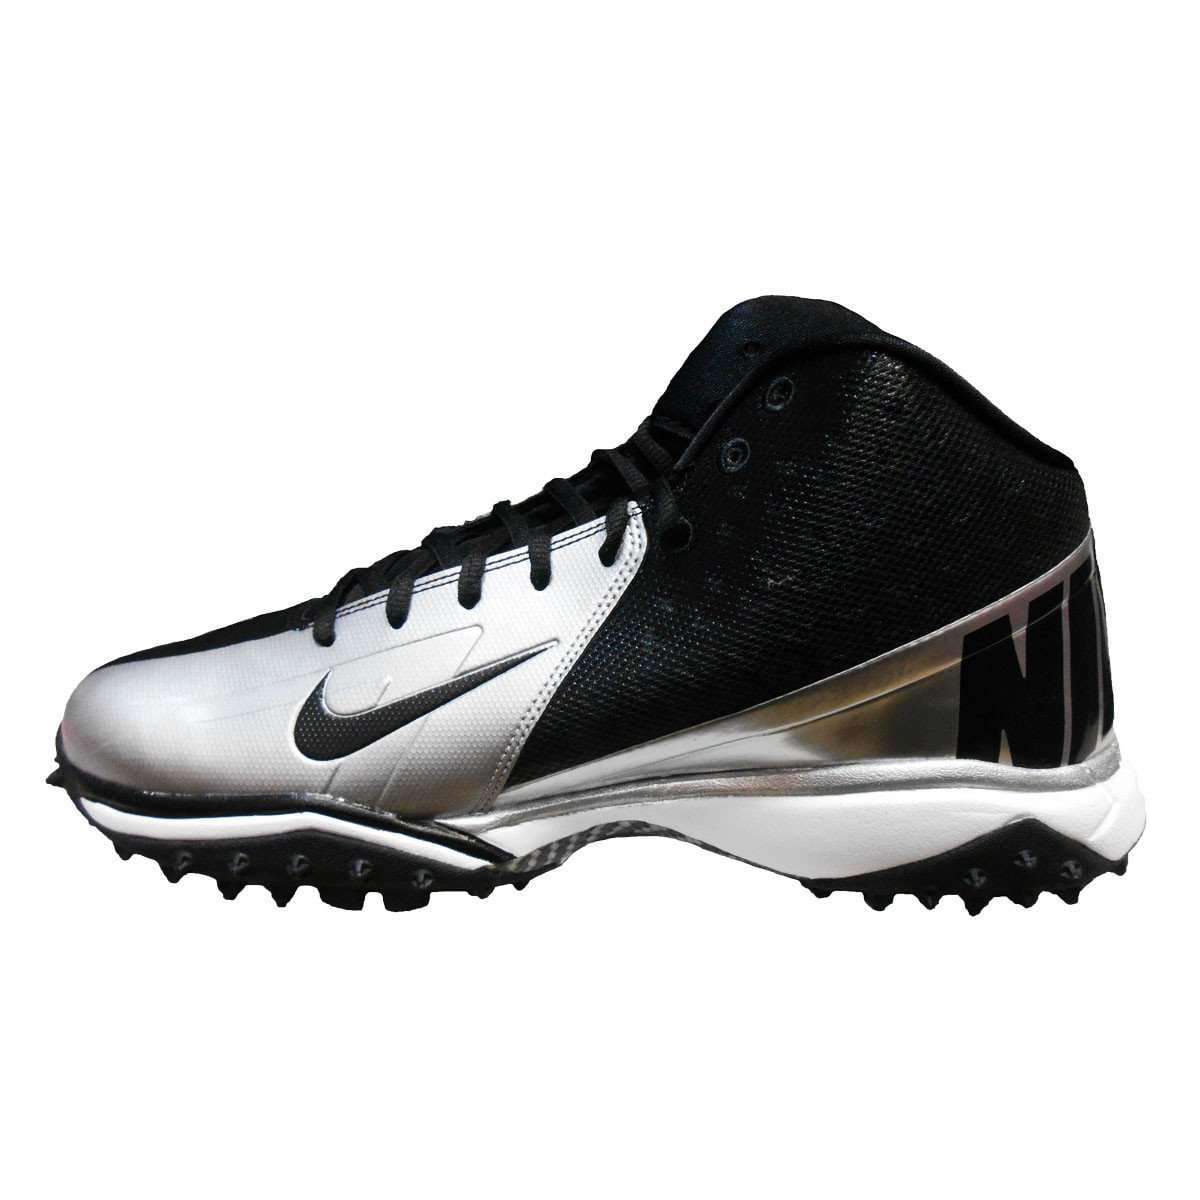 nike destroyer cleats